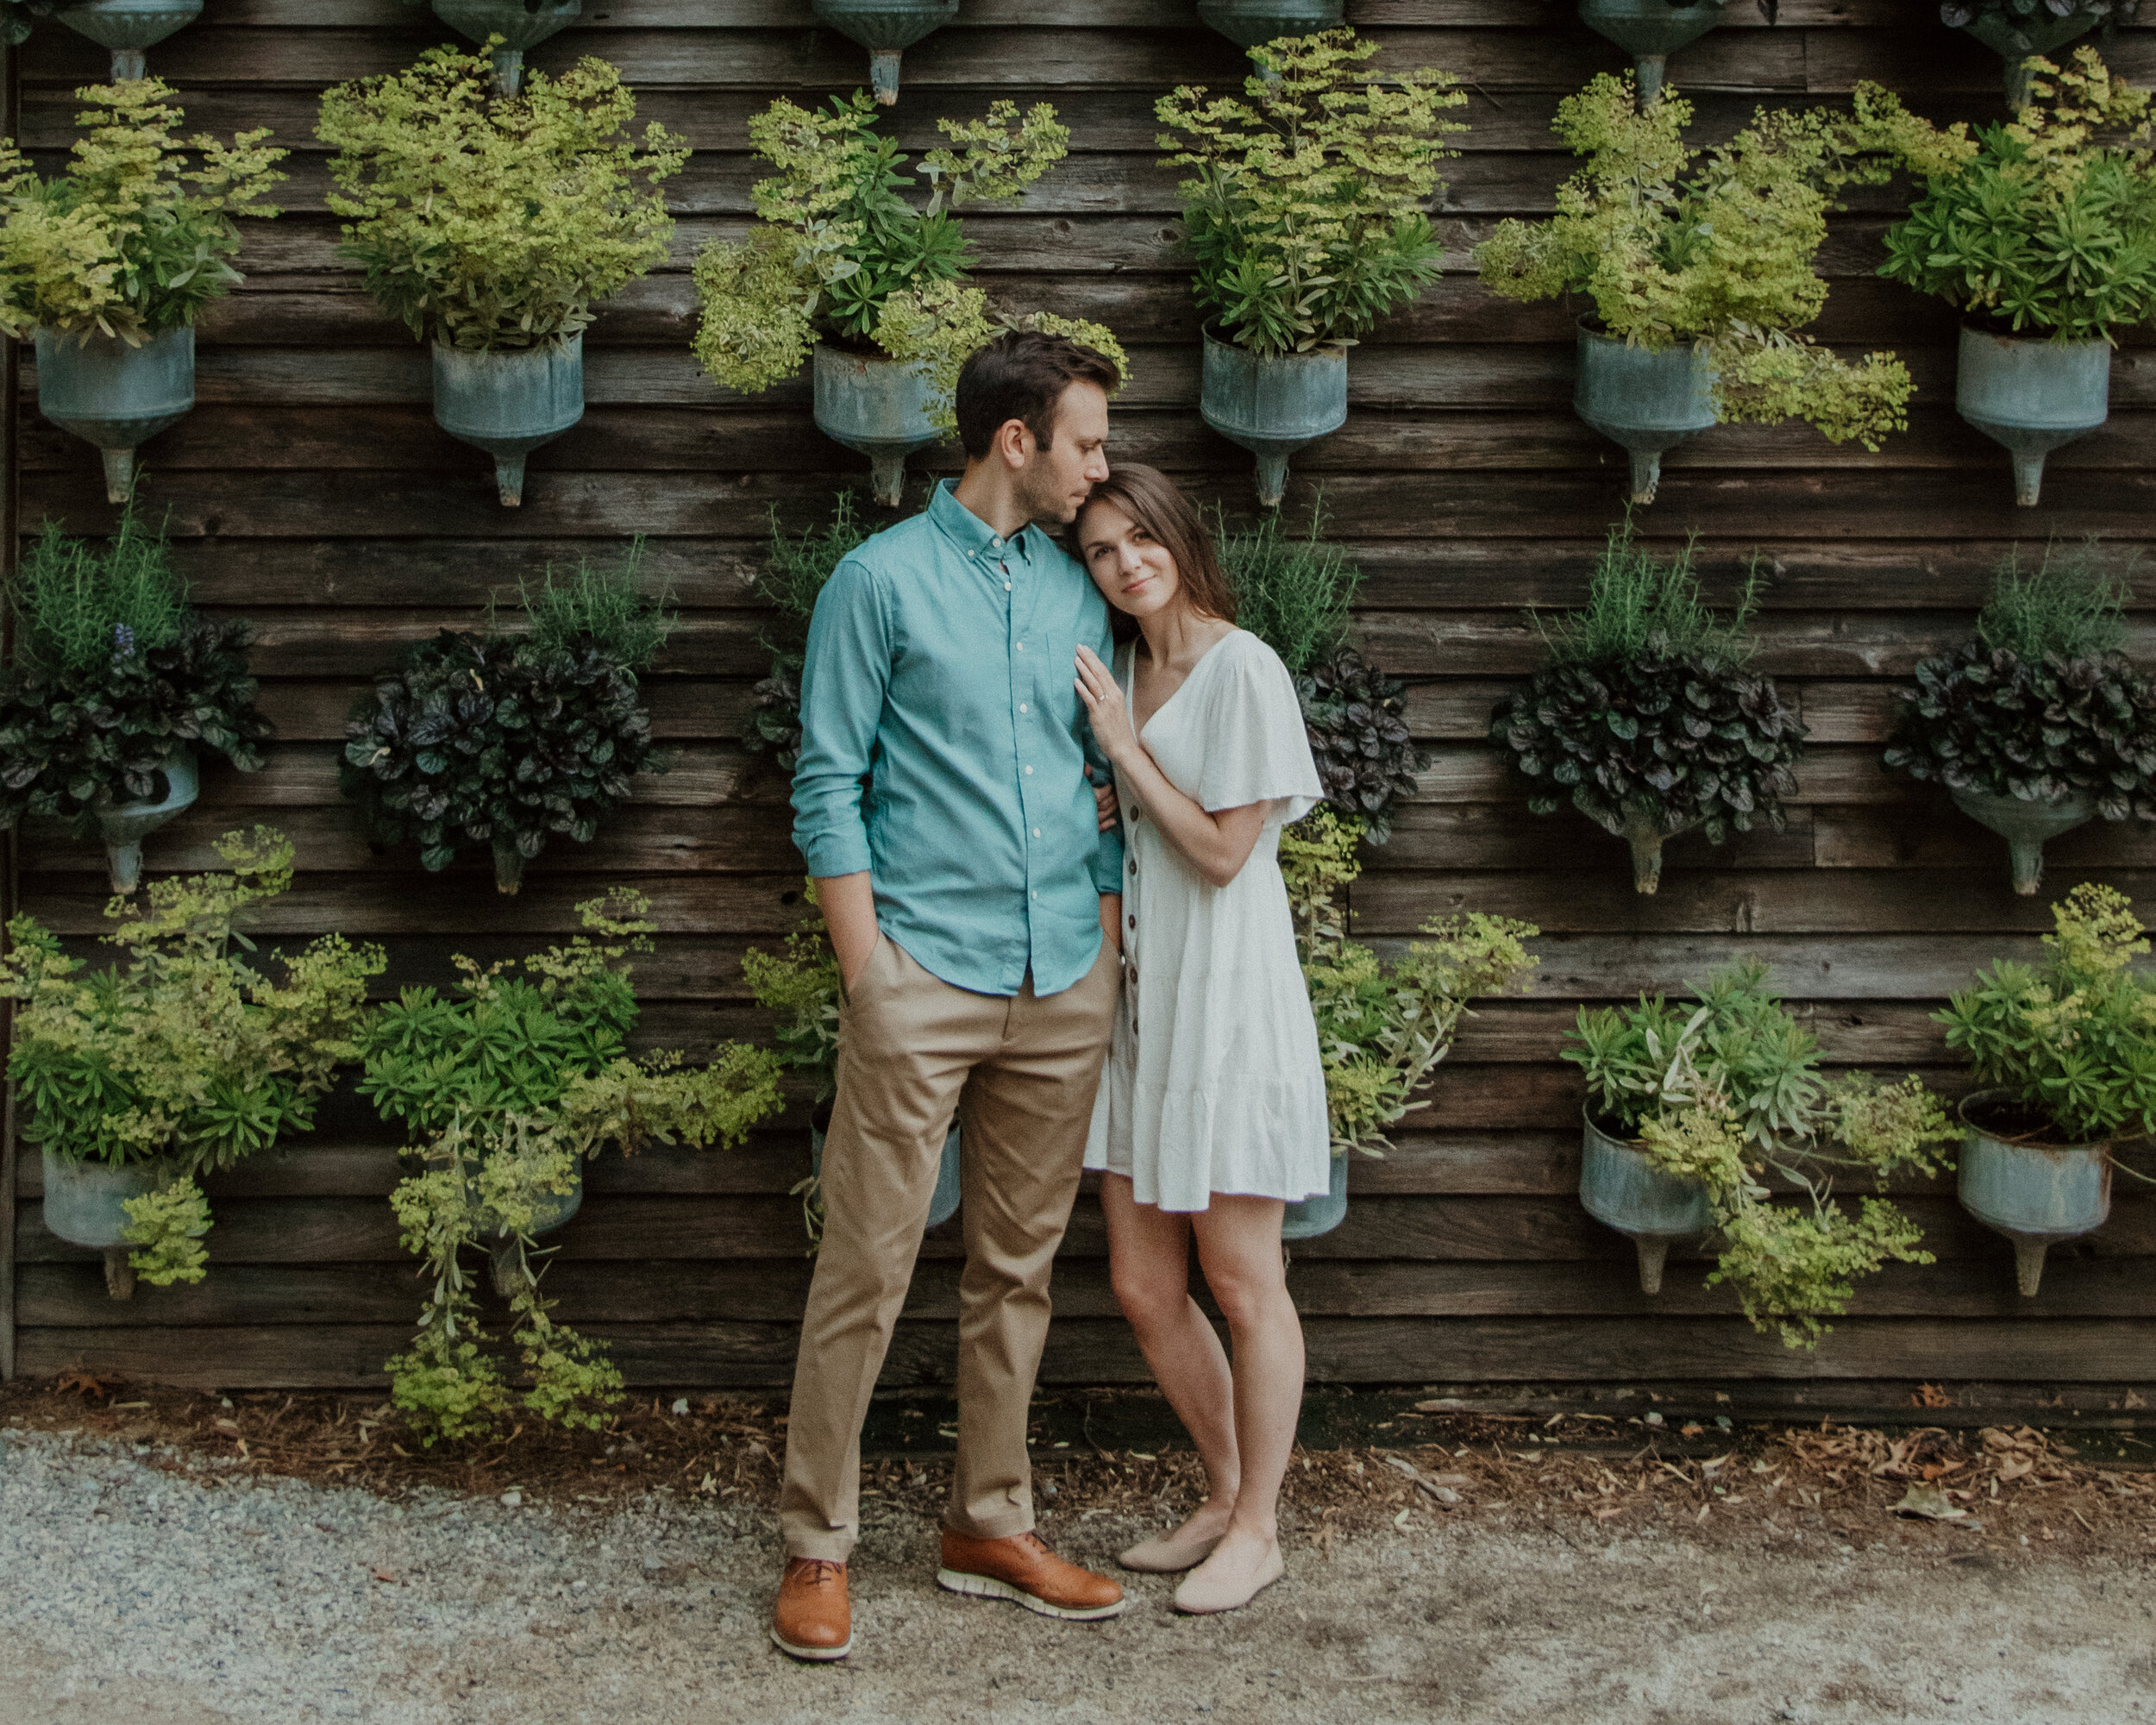 From Nashville to Pennsylvania-Laura and Jeremiah's Engagement Session